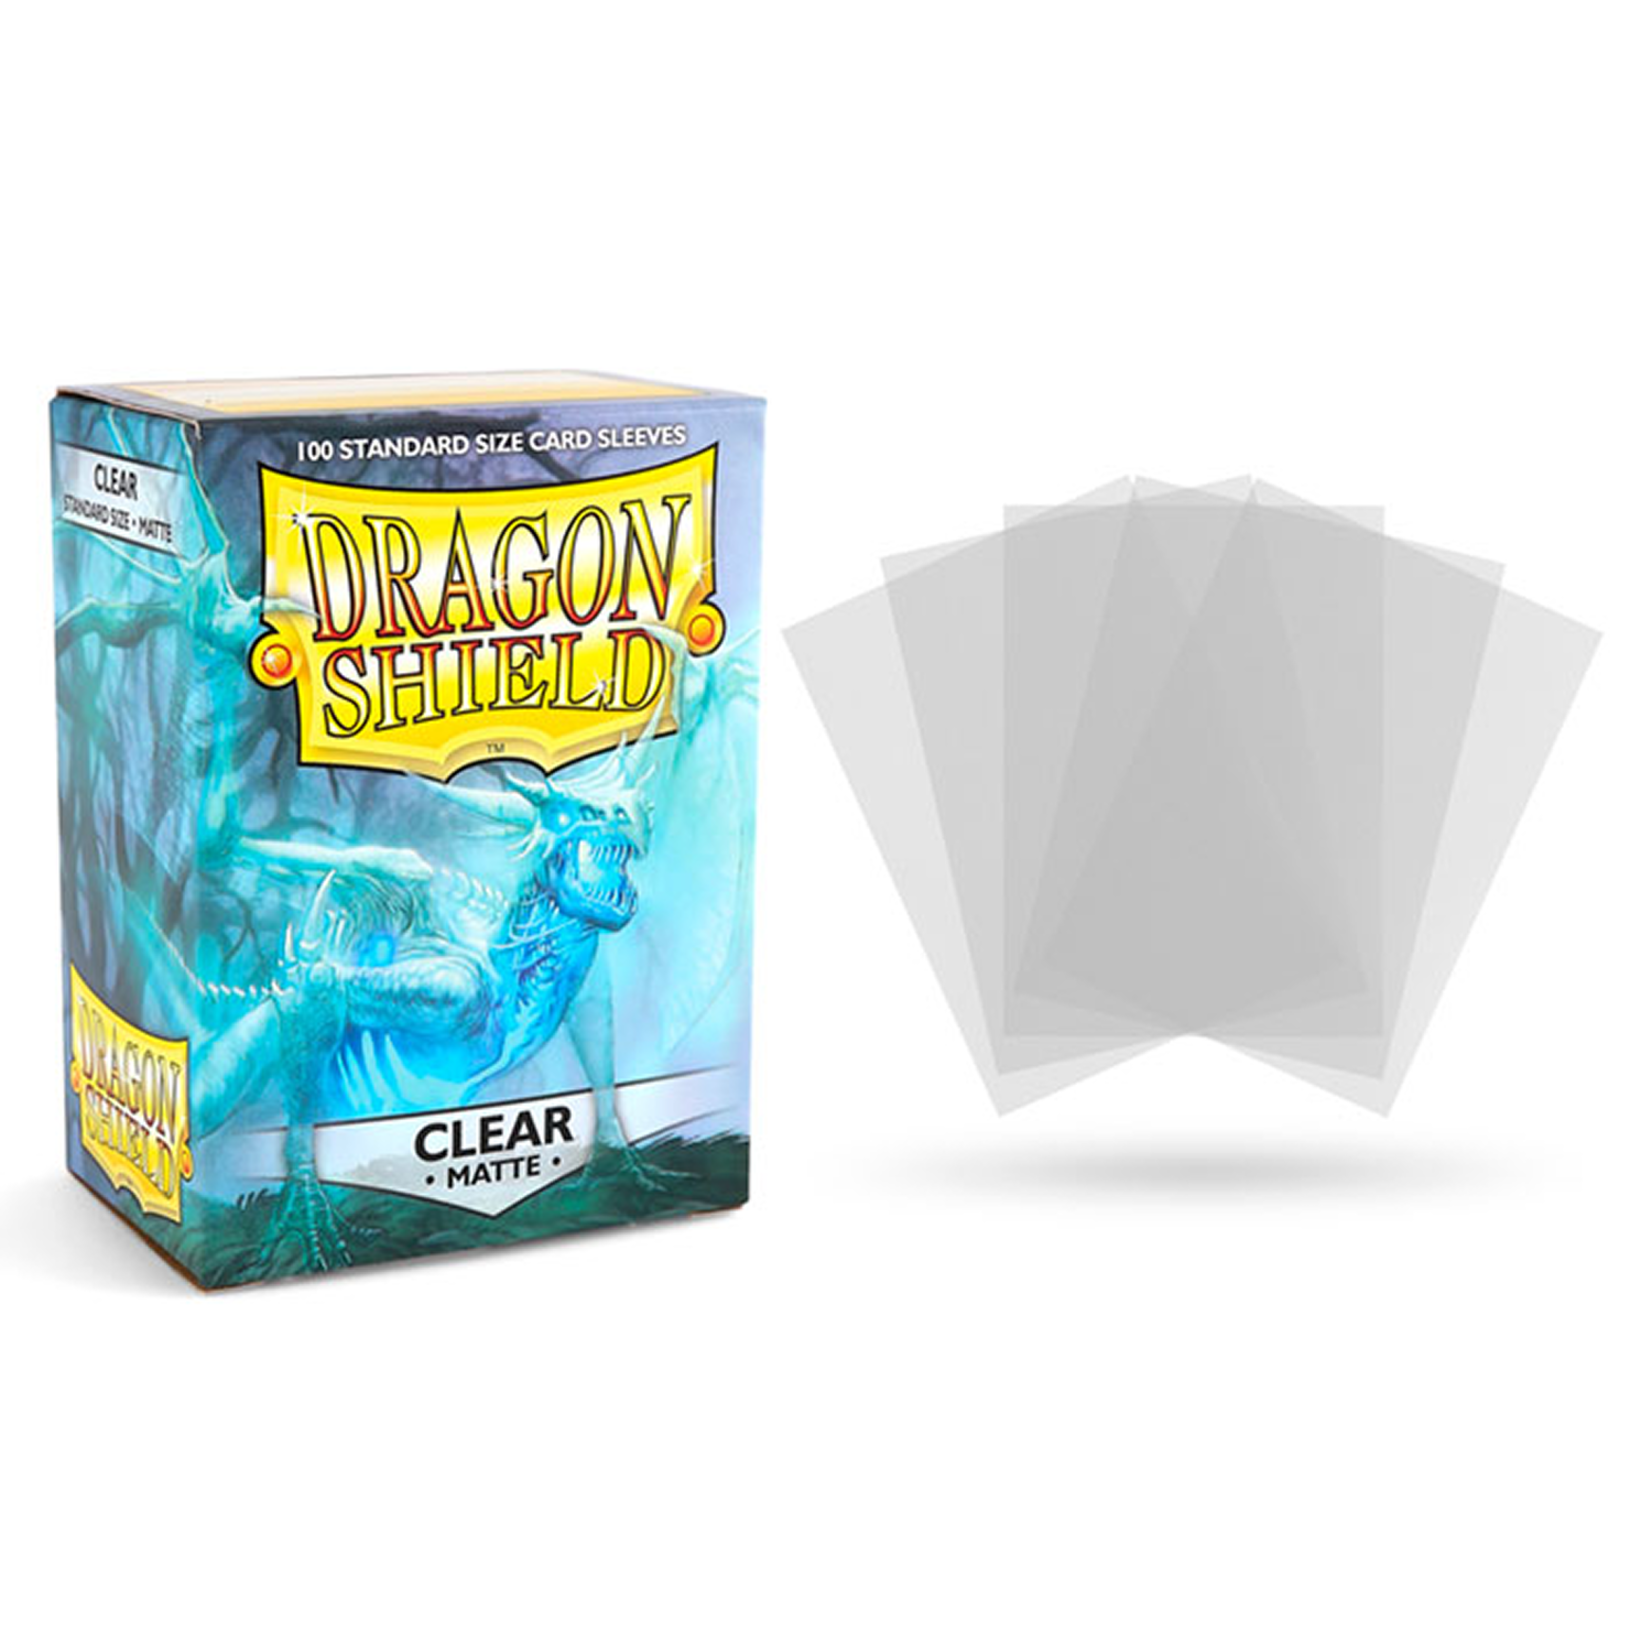 Myu Collectibles - Dragon Shield Classic Clear Sleeves